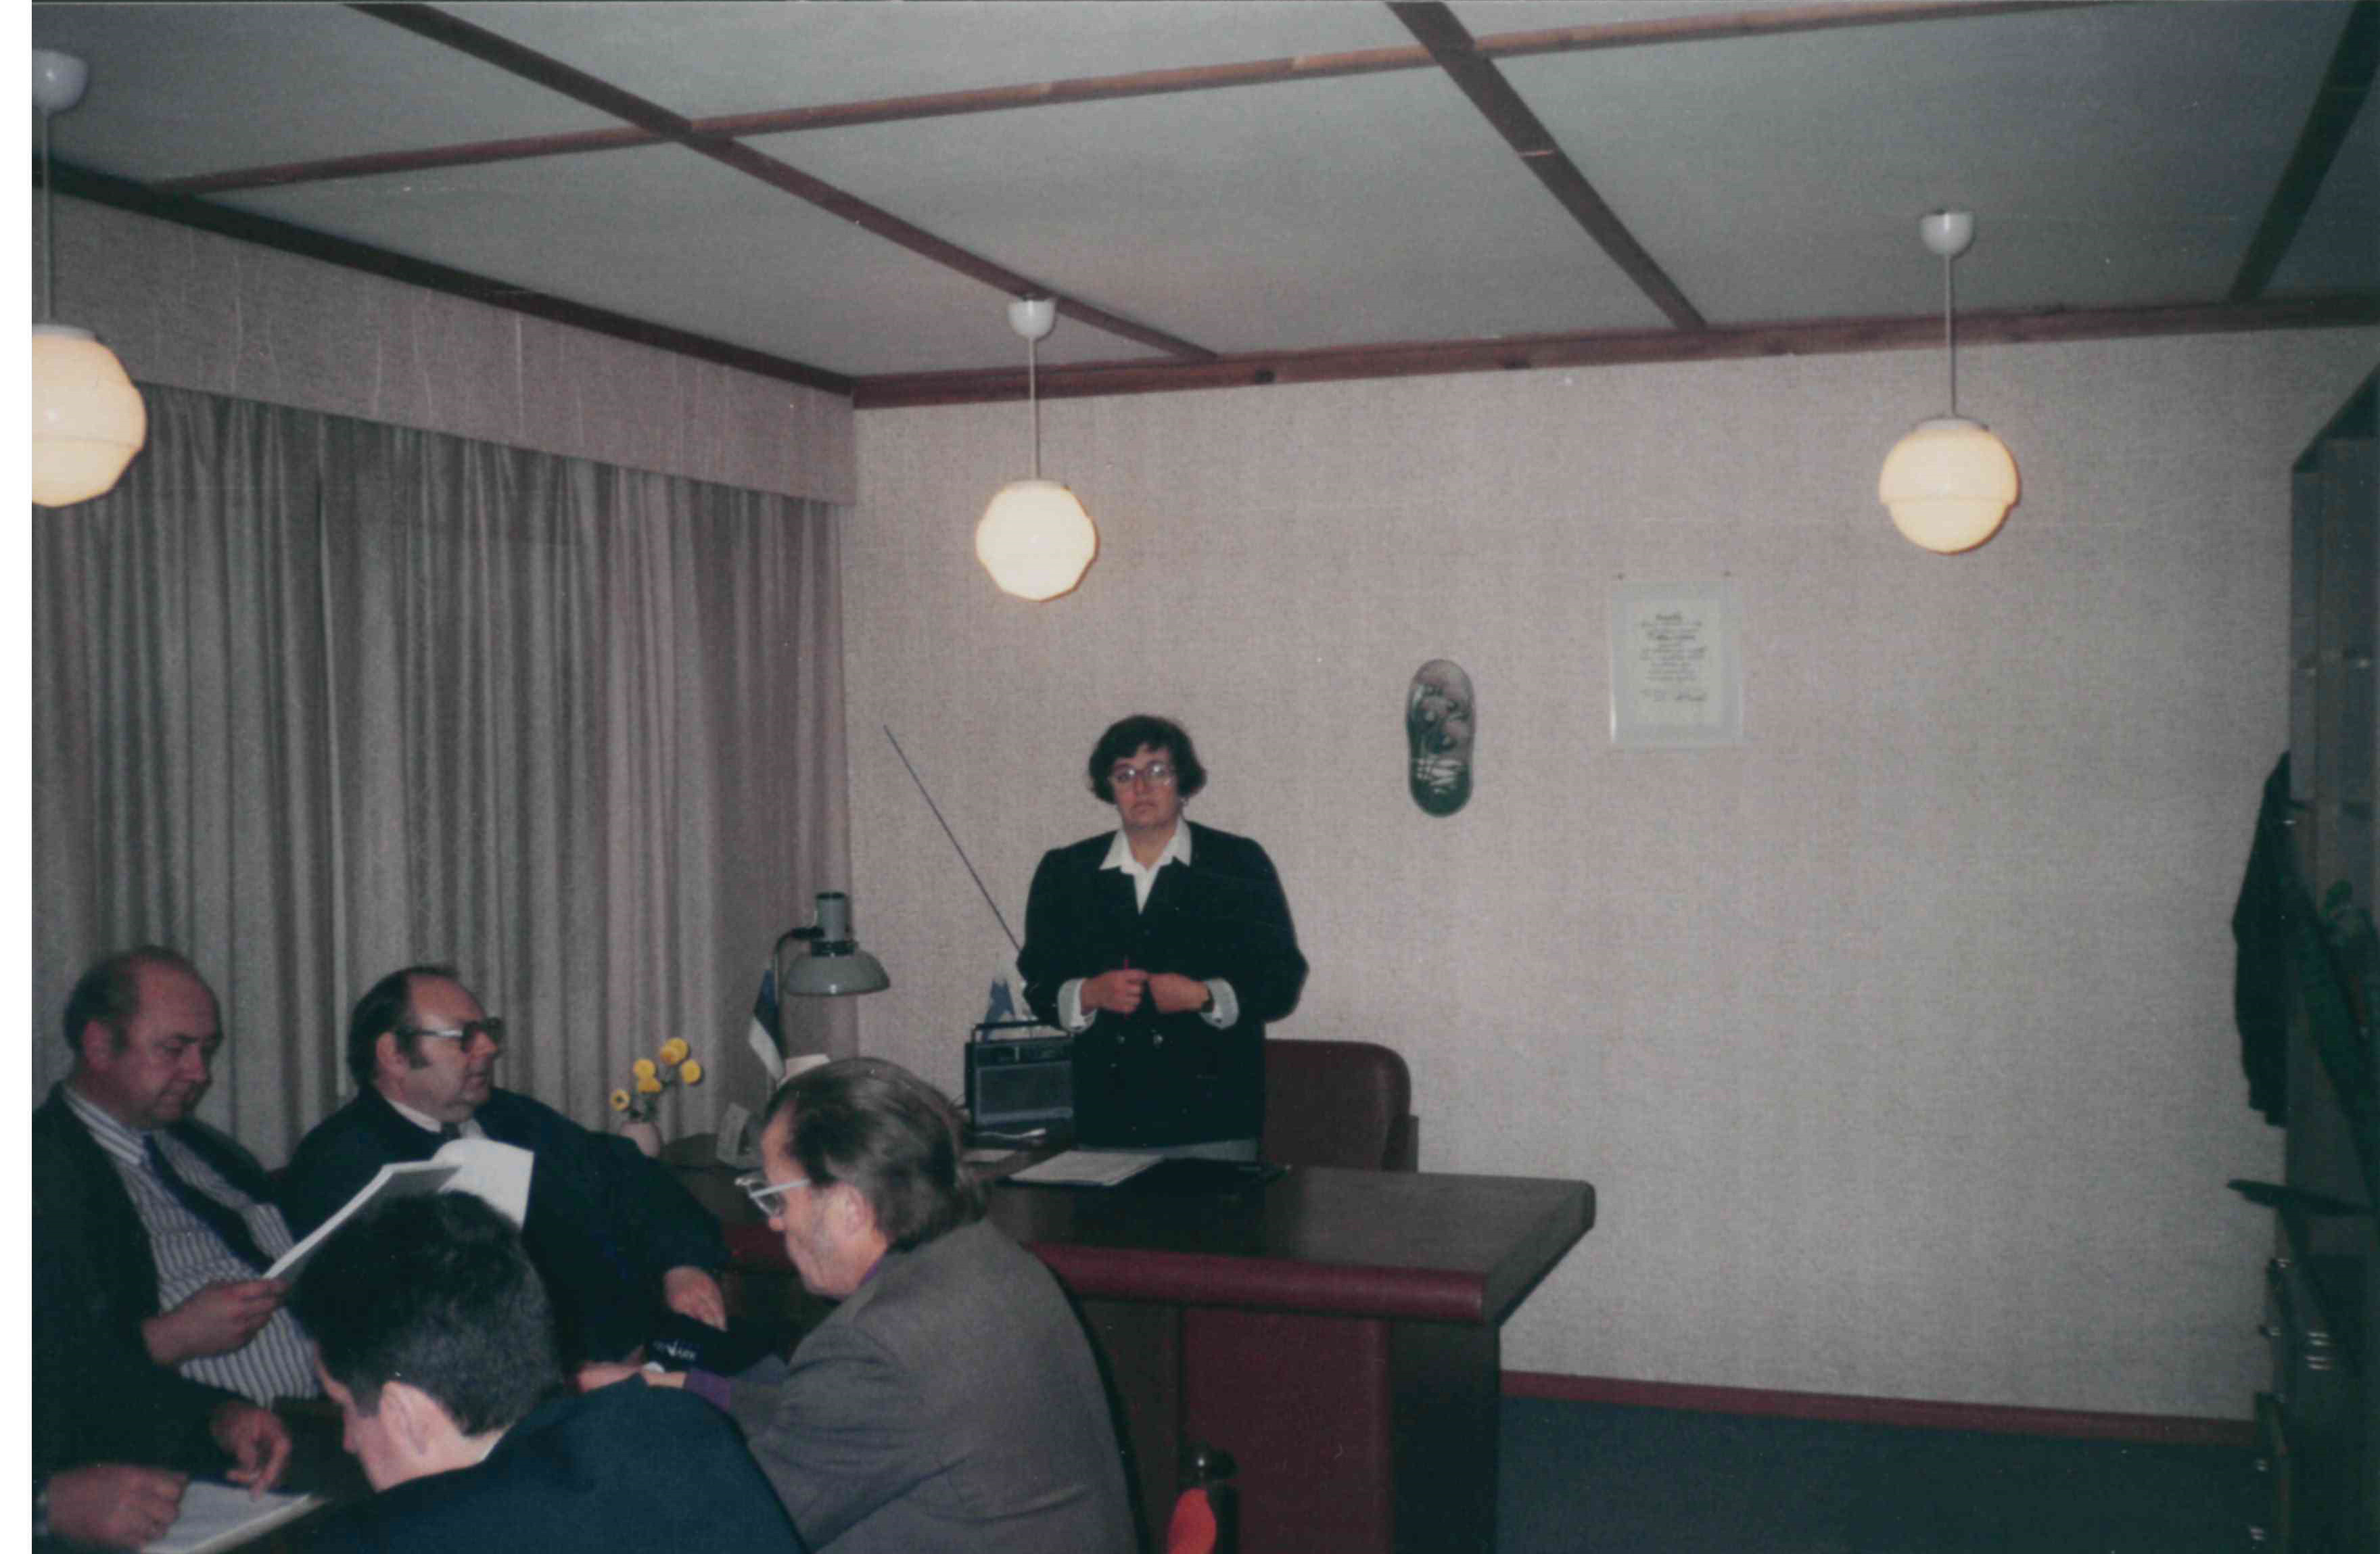 1st meeting of the Council elected in October 1996